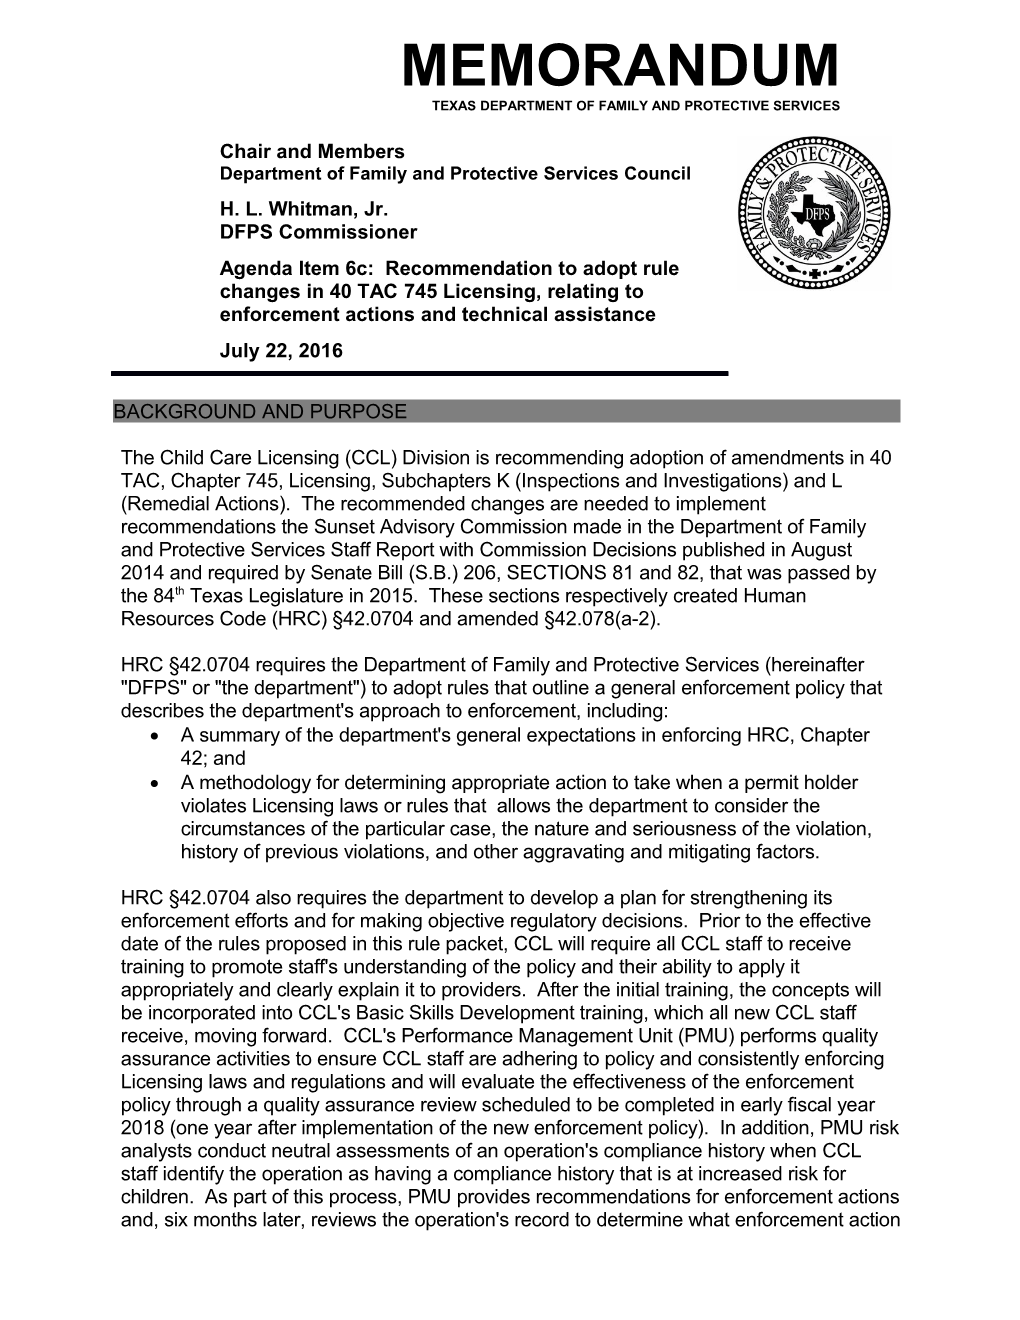 Memorandum Texas Department of Family and Protective Services